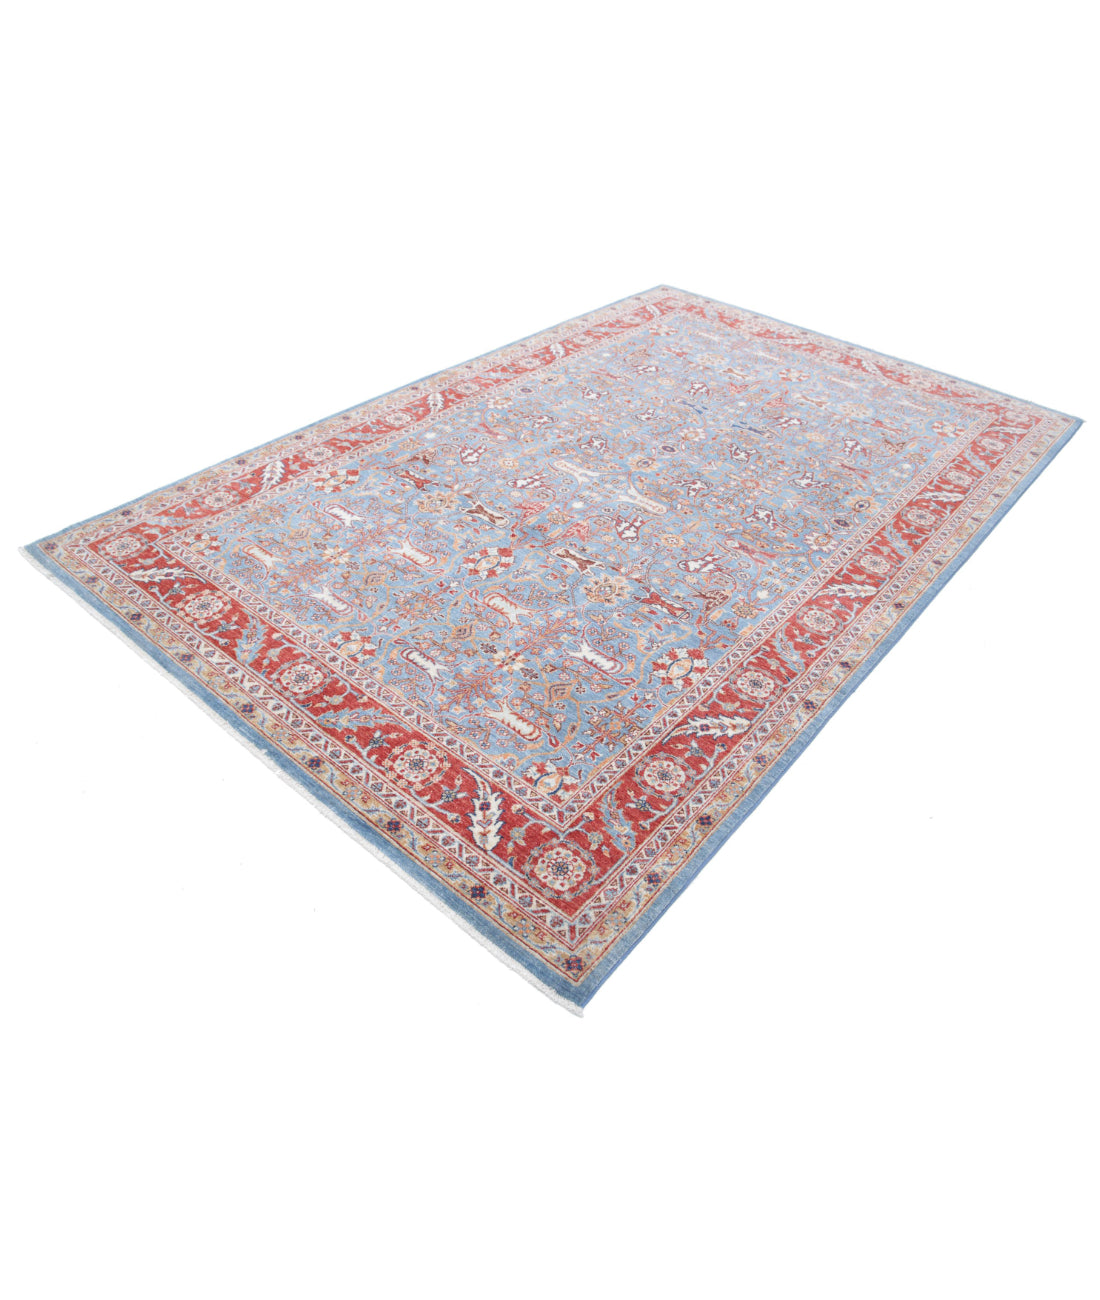 Ziegler 6'4'' X 9'10'' Hand-Knotted Wool Rug 6'4'' x 9'10'' (190 X 295) / Blue / Red